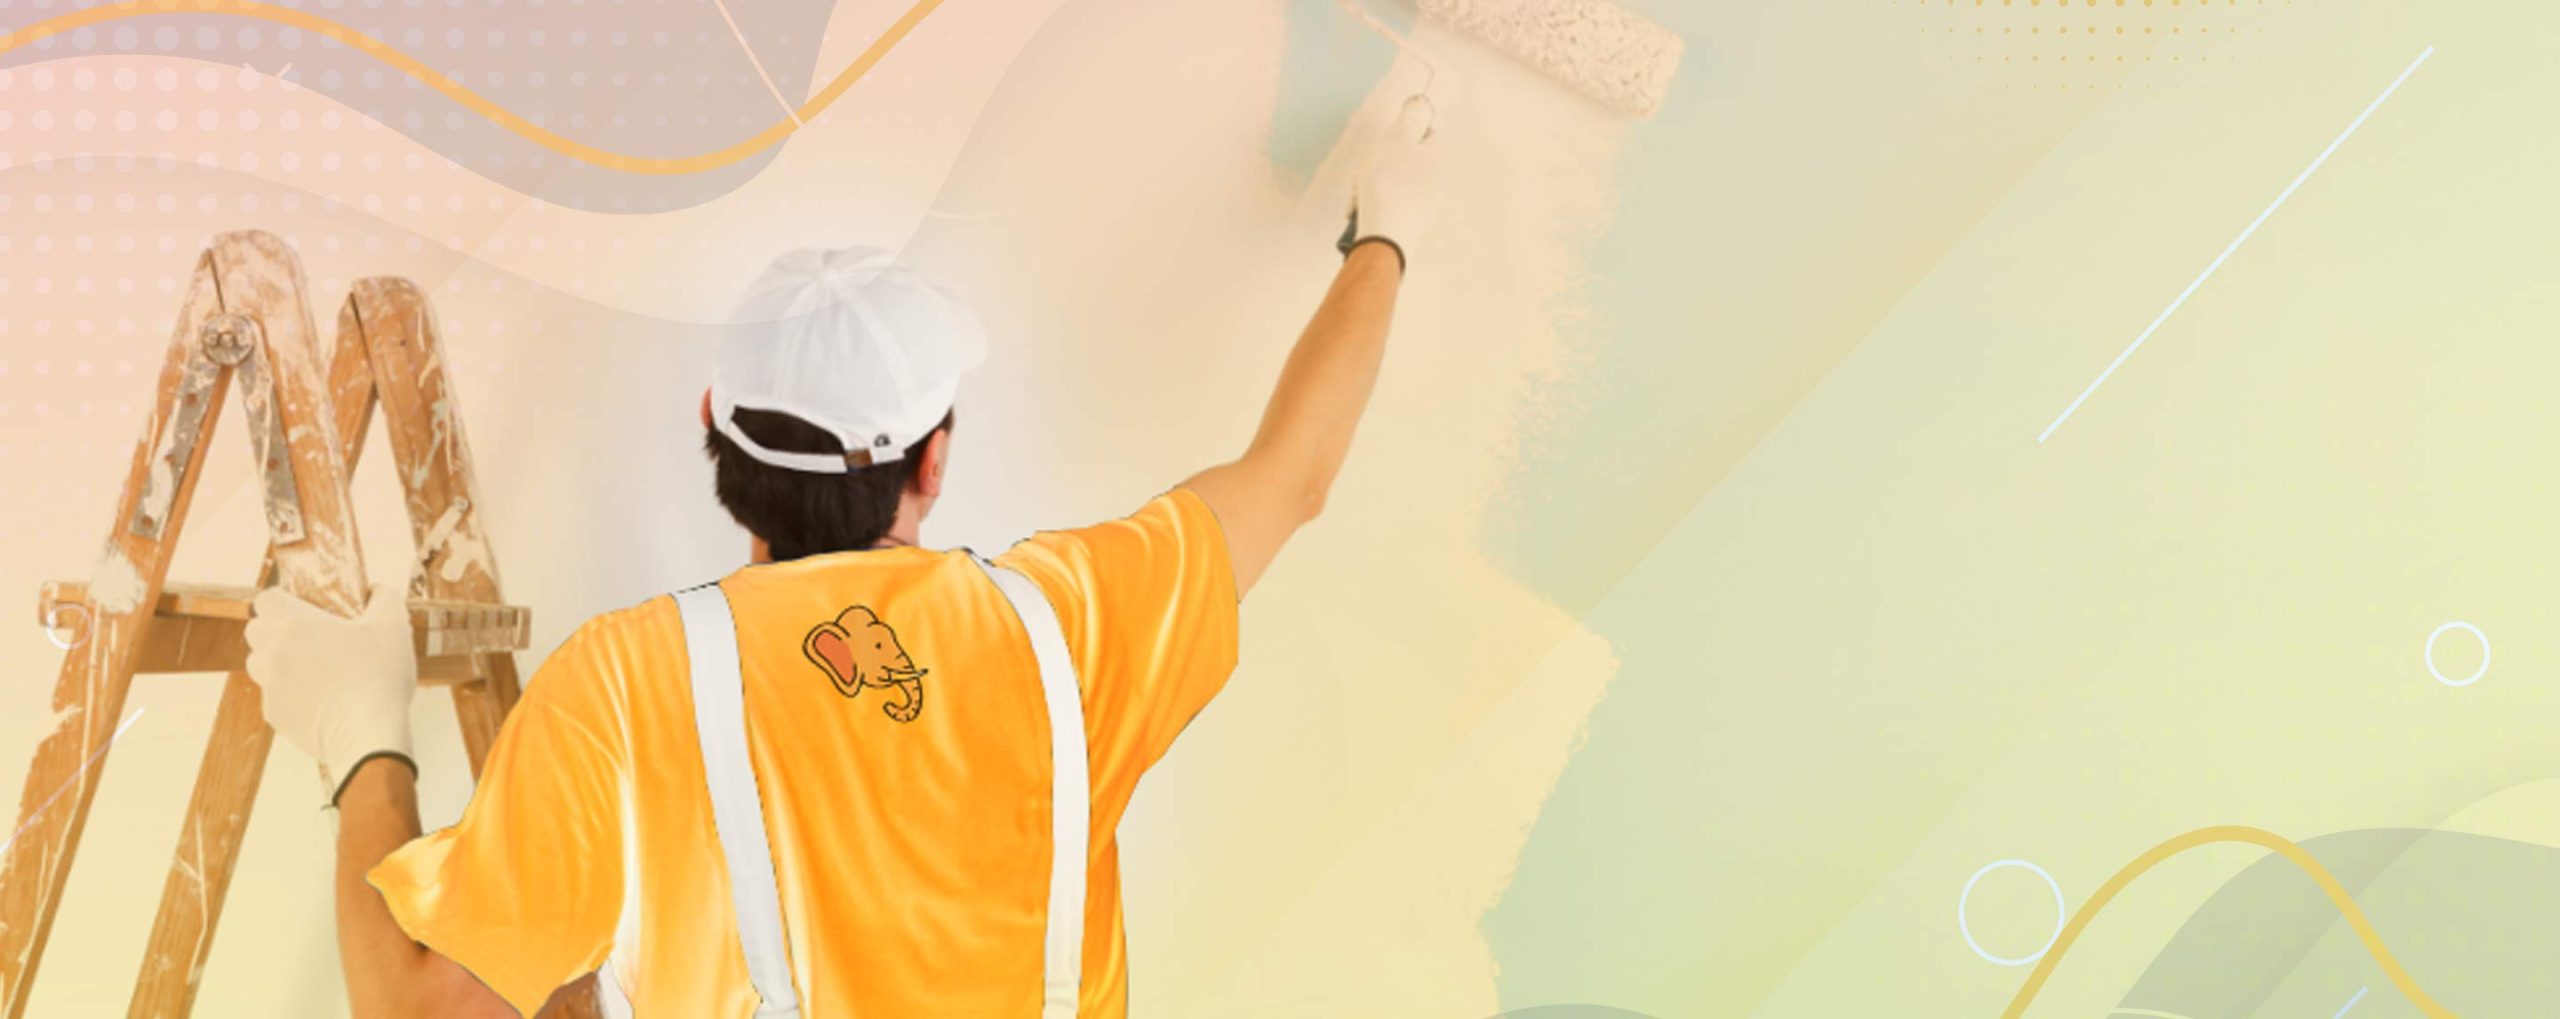 Be smart while painting your spaces